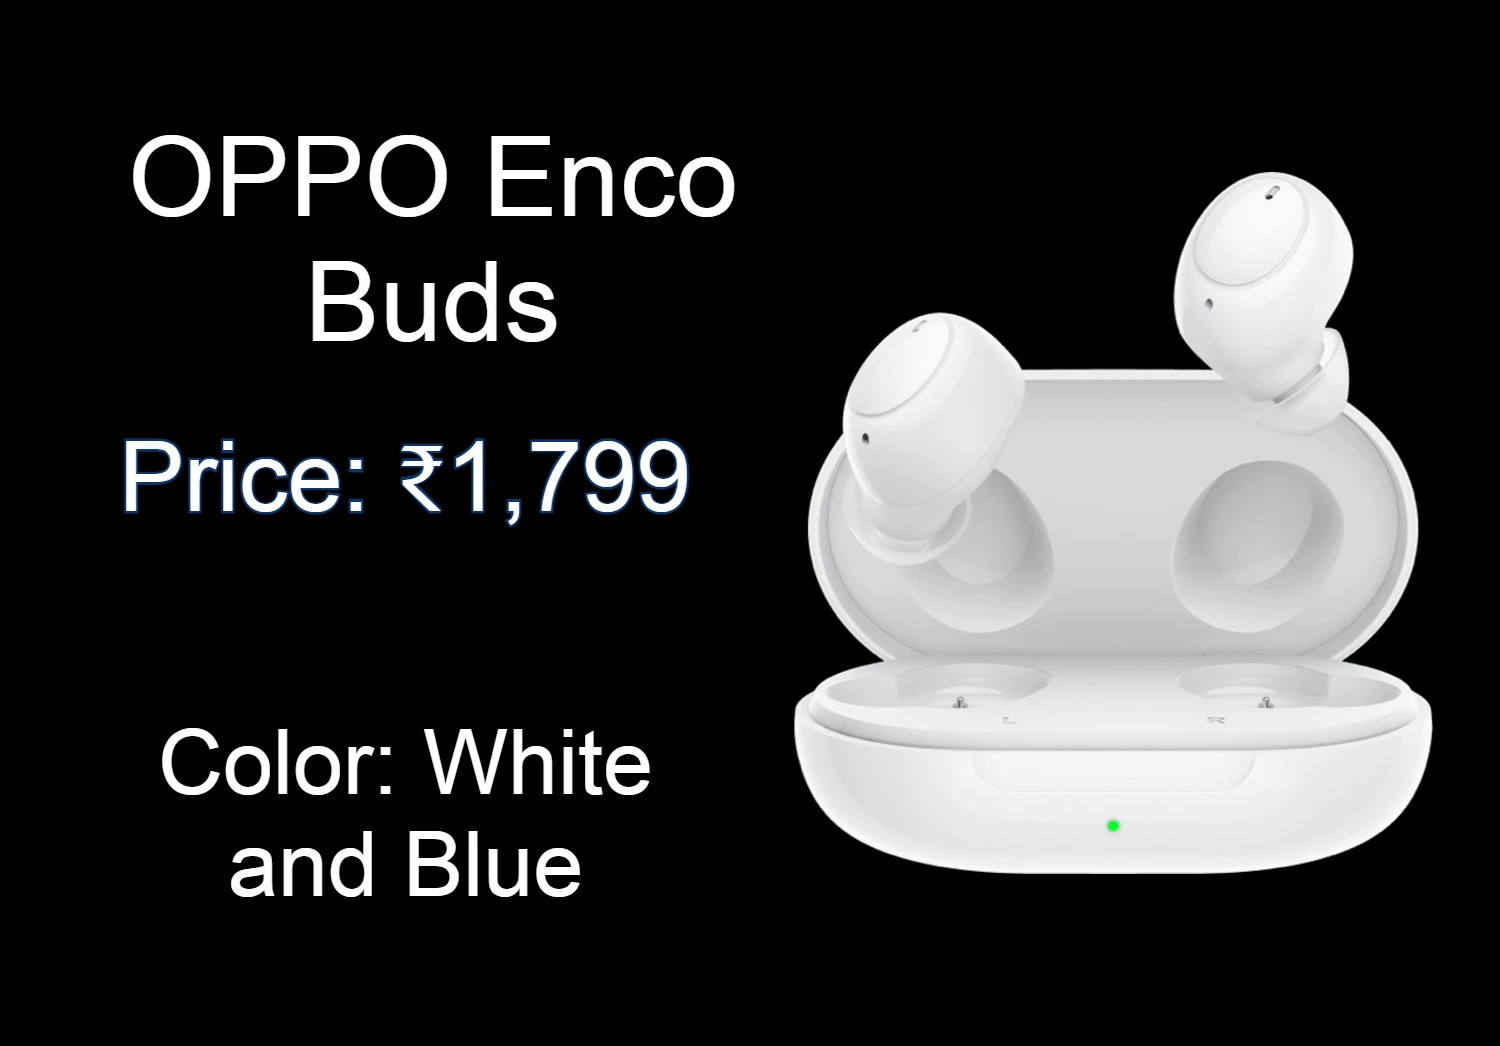 Ear pods under Rs.2000 | HighQ Wireless earbuds under Rs.2000